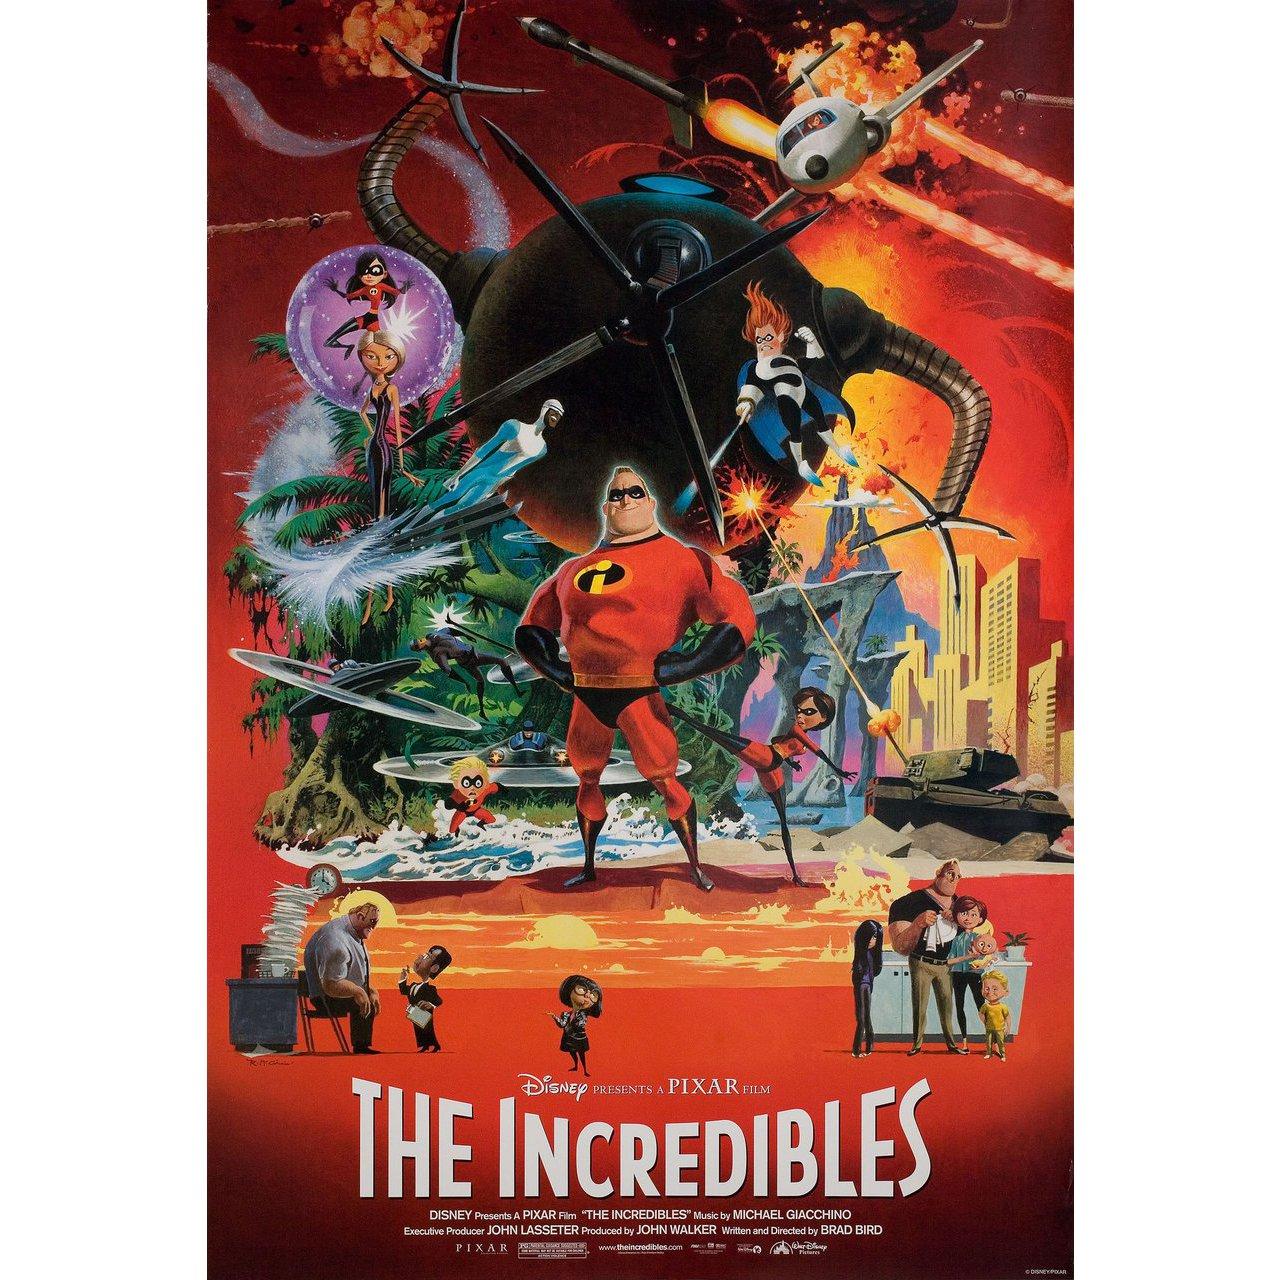 Original 2004 U.S. one sheet poster for the film The Incredibles directed by Brad Bird with Craig T. Nelson / Holly Hunter / Samuel L. Jackson / Jason Lee. Very good fine condition, rolled. Please note: the size is stated in inches and the actual